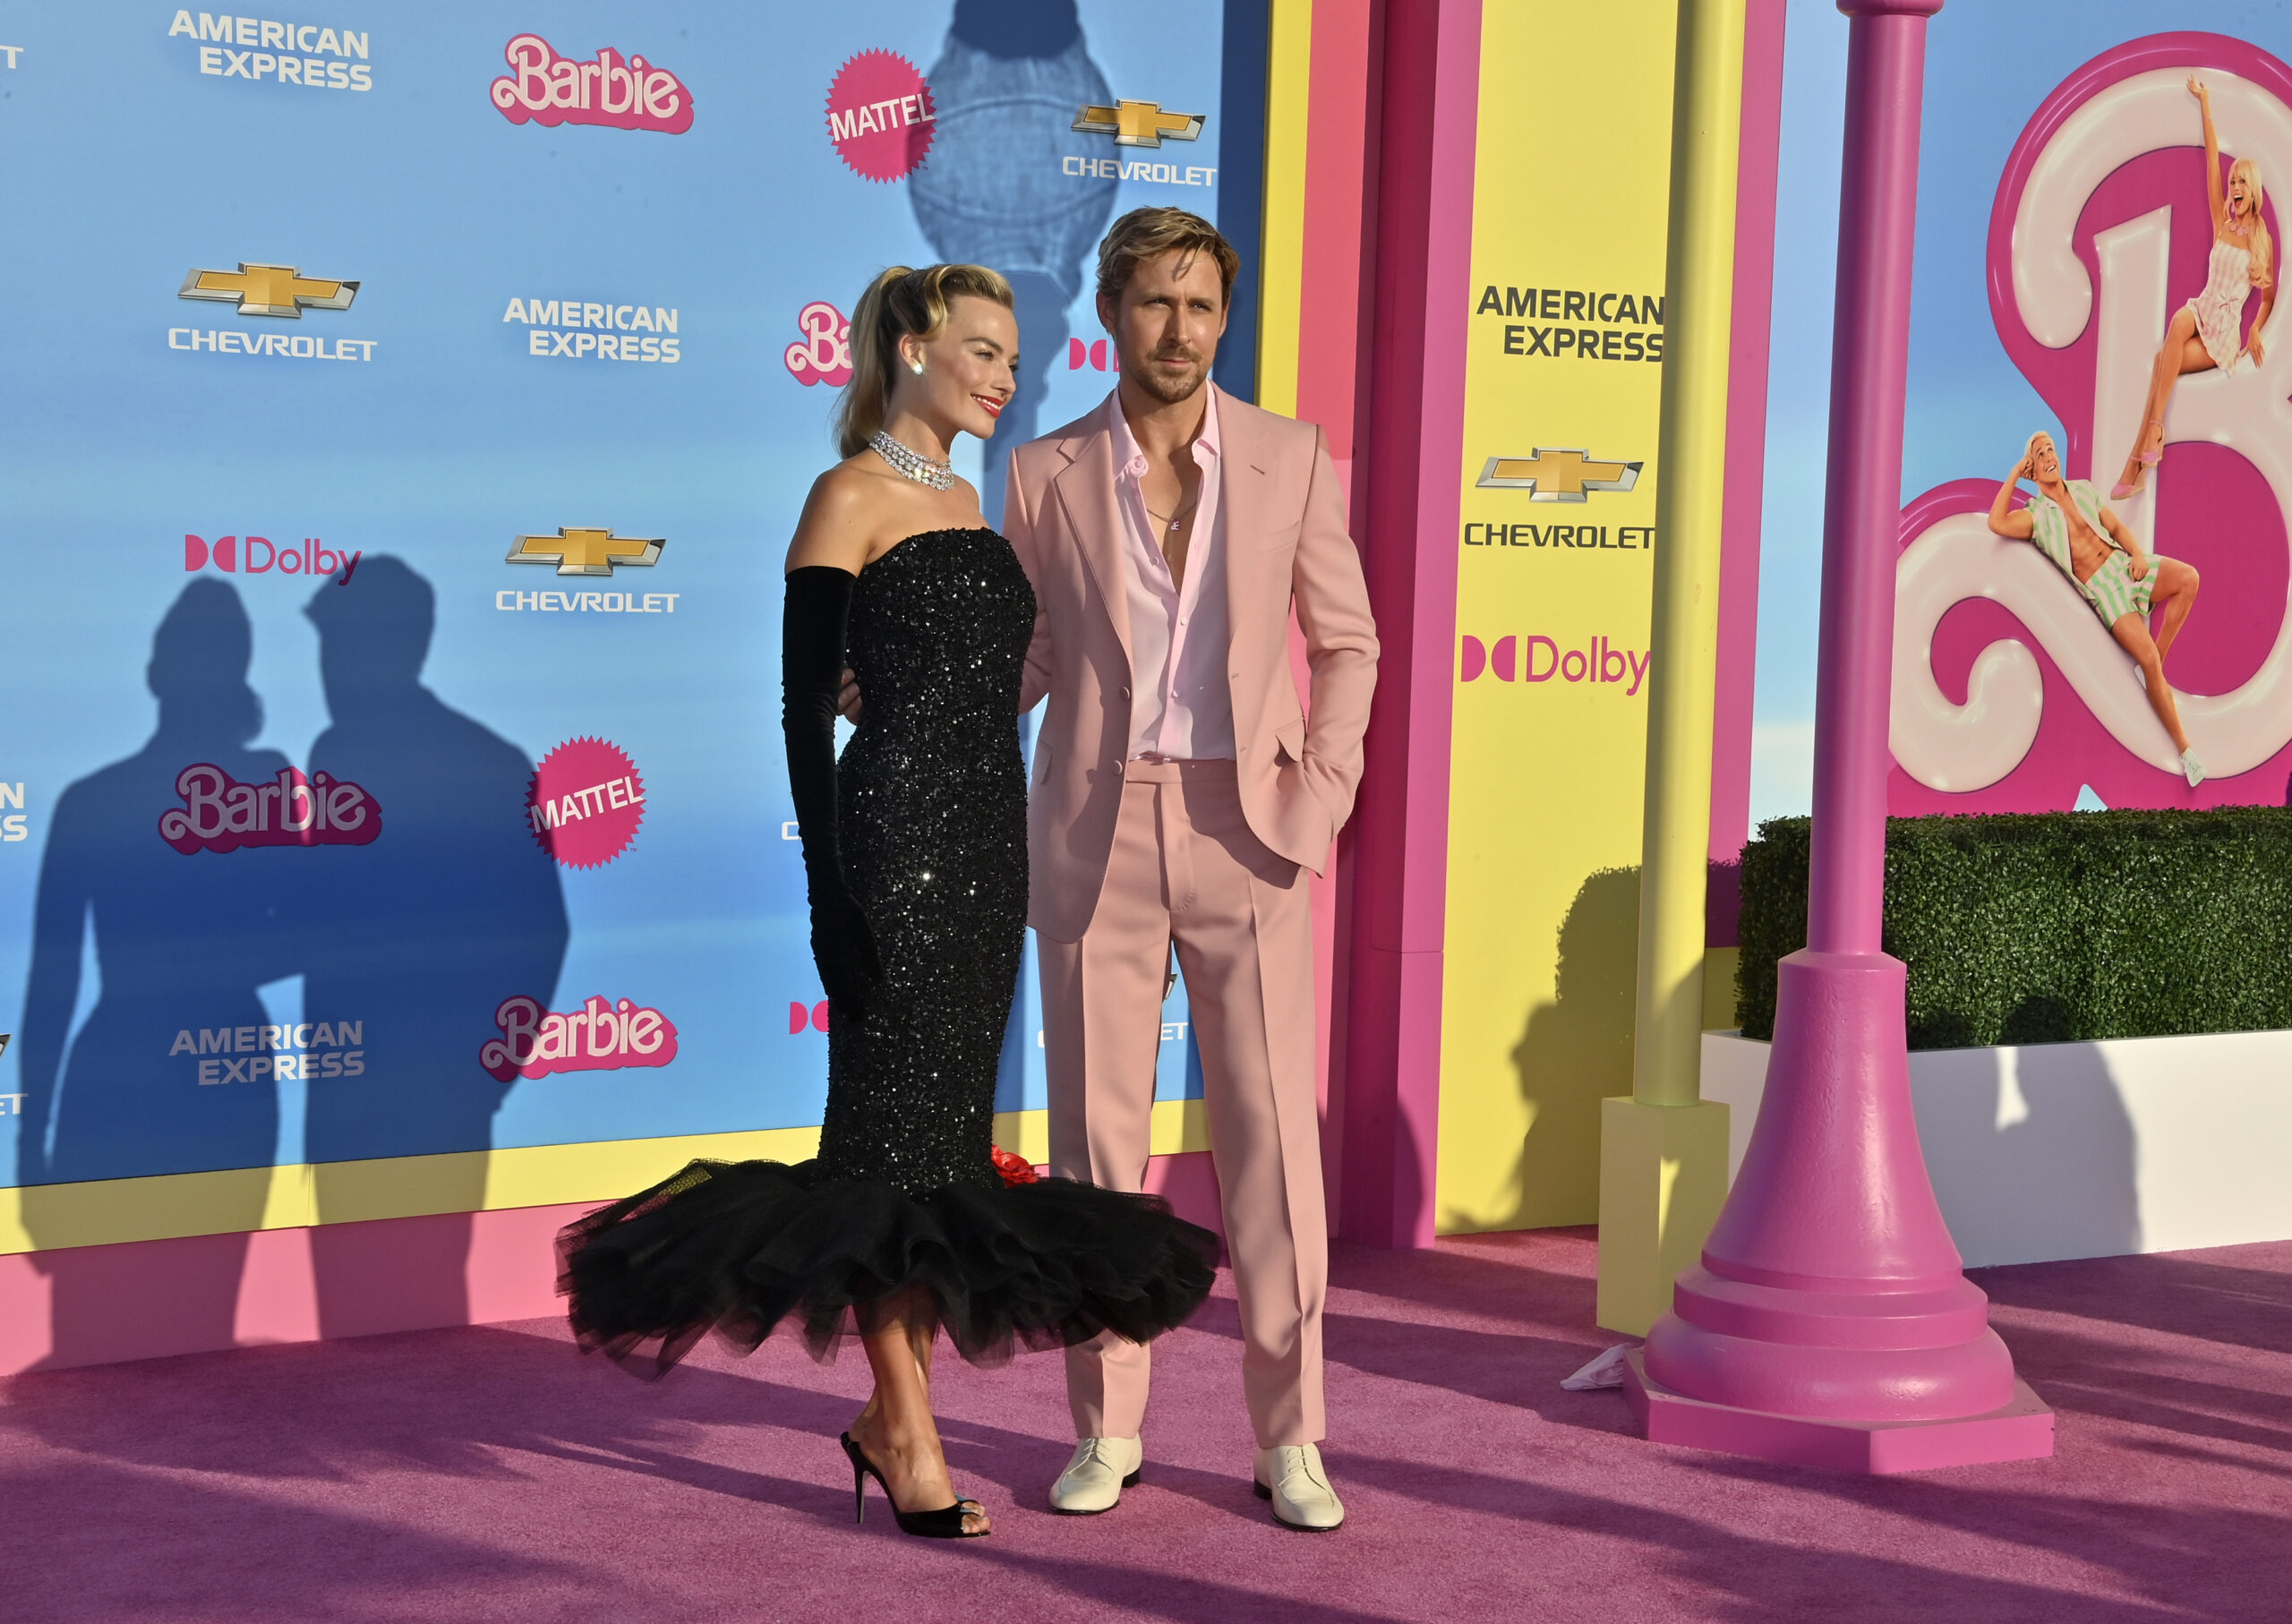 Cast members Margot Robbie (L) and Ryan Gosling attend the premiere of the motion picture romantic comedy "Barbie" at the Shrine Auditorium on Sunday, July 9, 2023. Storyline: Barbie suffers a crisis that leads her to question her world and her existence.